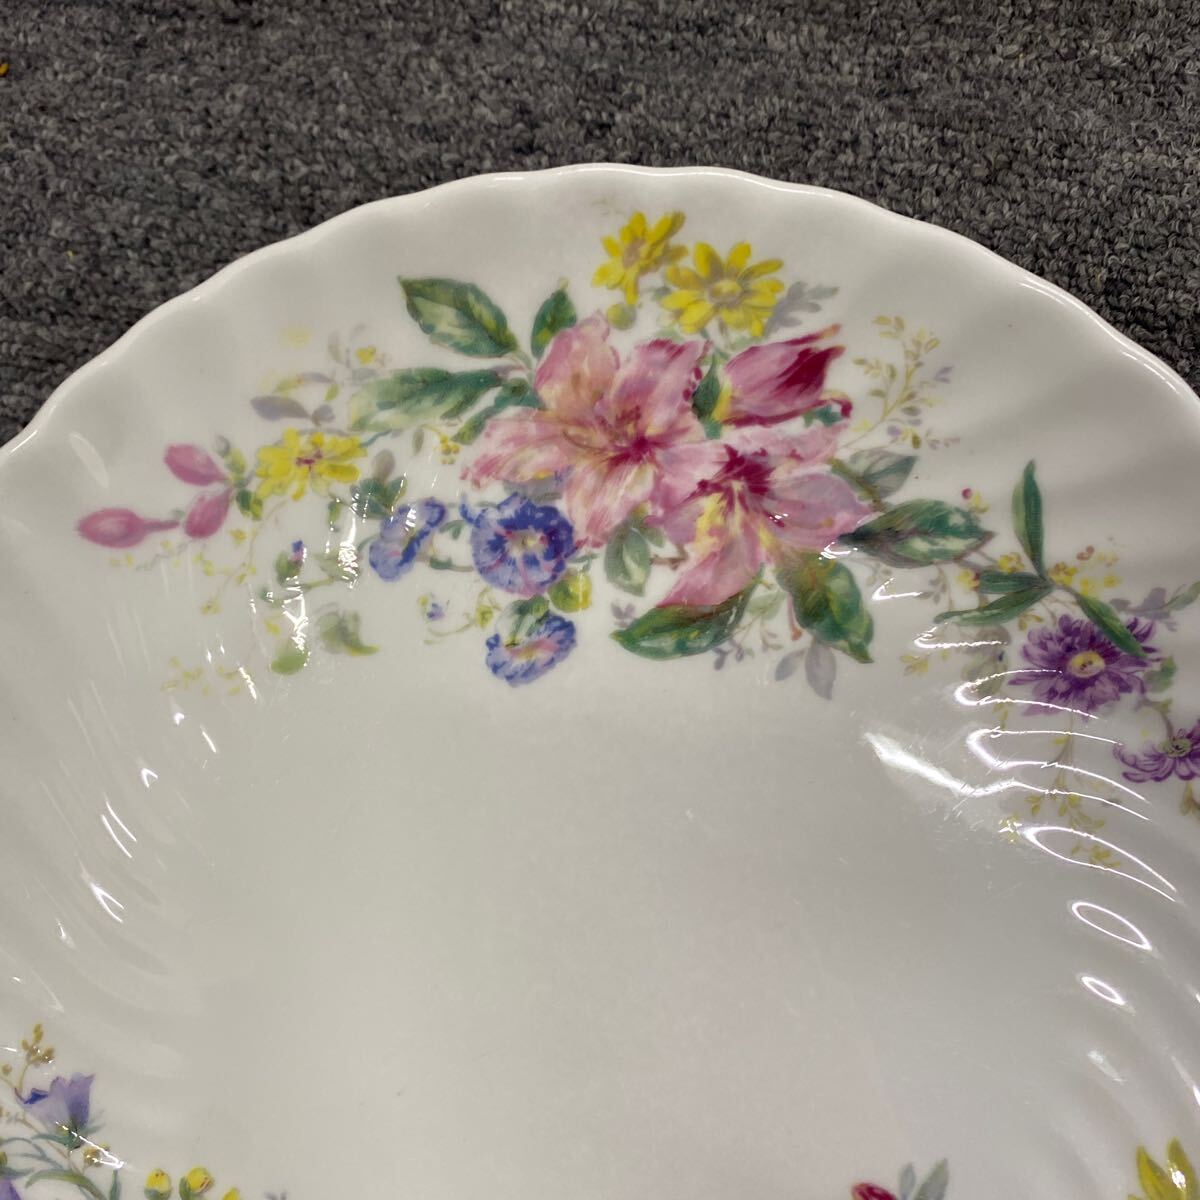 04110 Royal Doulton Royal Doultona LUKA tiaARCADIA ear attaching plate 2 pieces set floral print Western-style tableware 